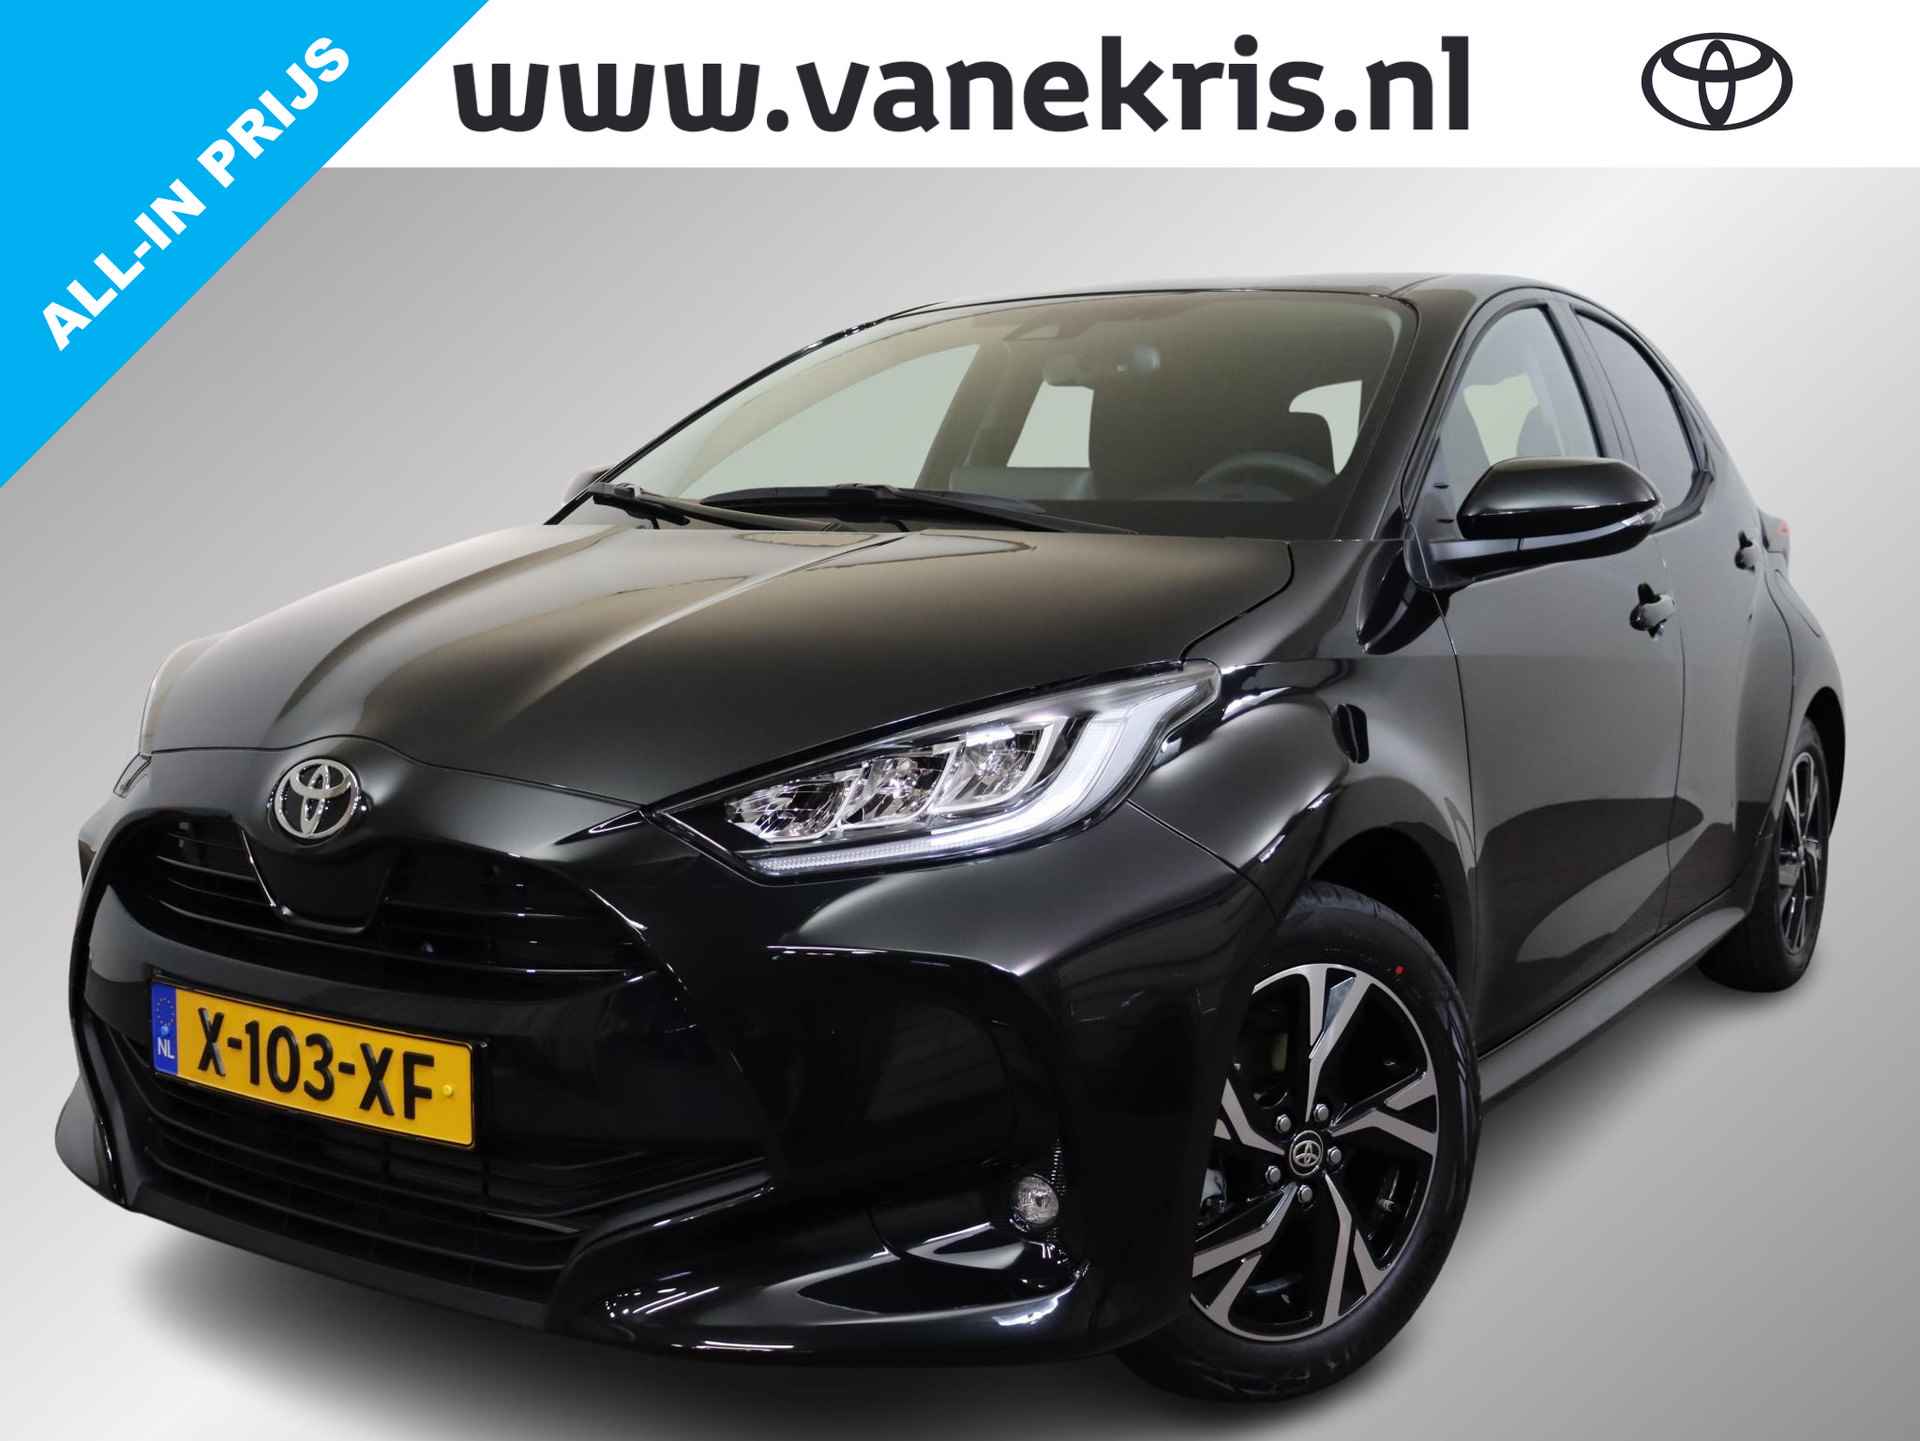 Toyota Yaris 1.5 VVT-i First Edition, NAVI, Smart key, 16 Inch Lm velgen, Draadloos Apple care play & Android auto!! - 1/31